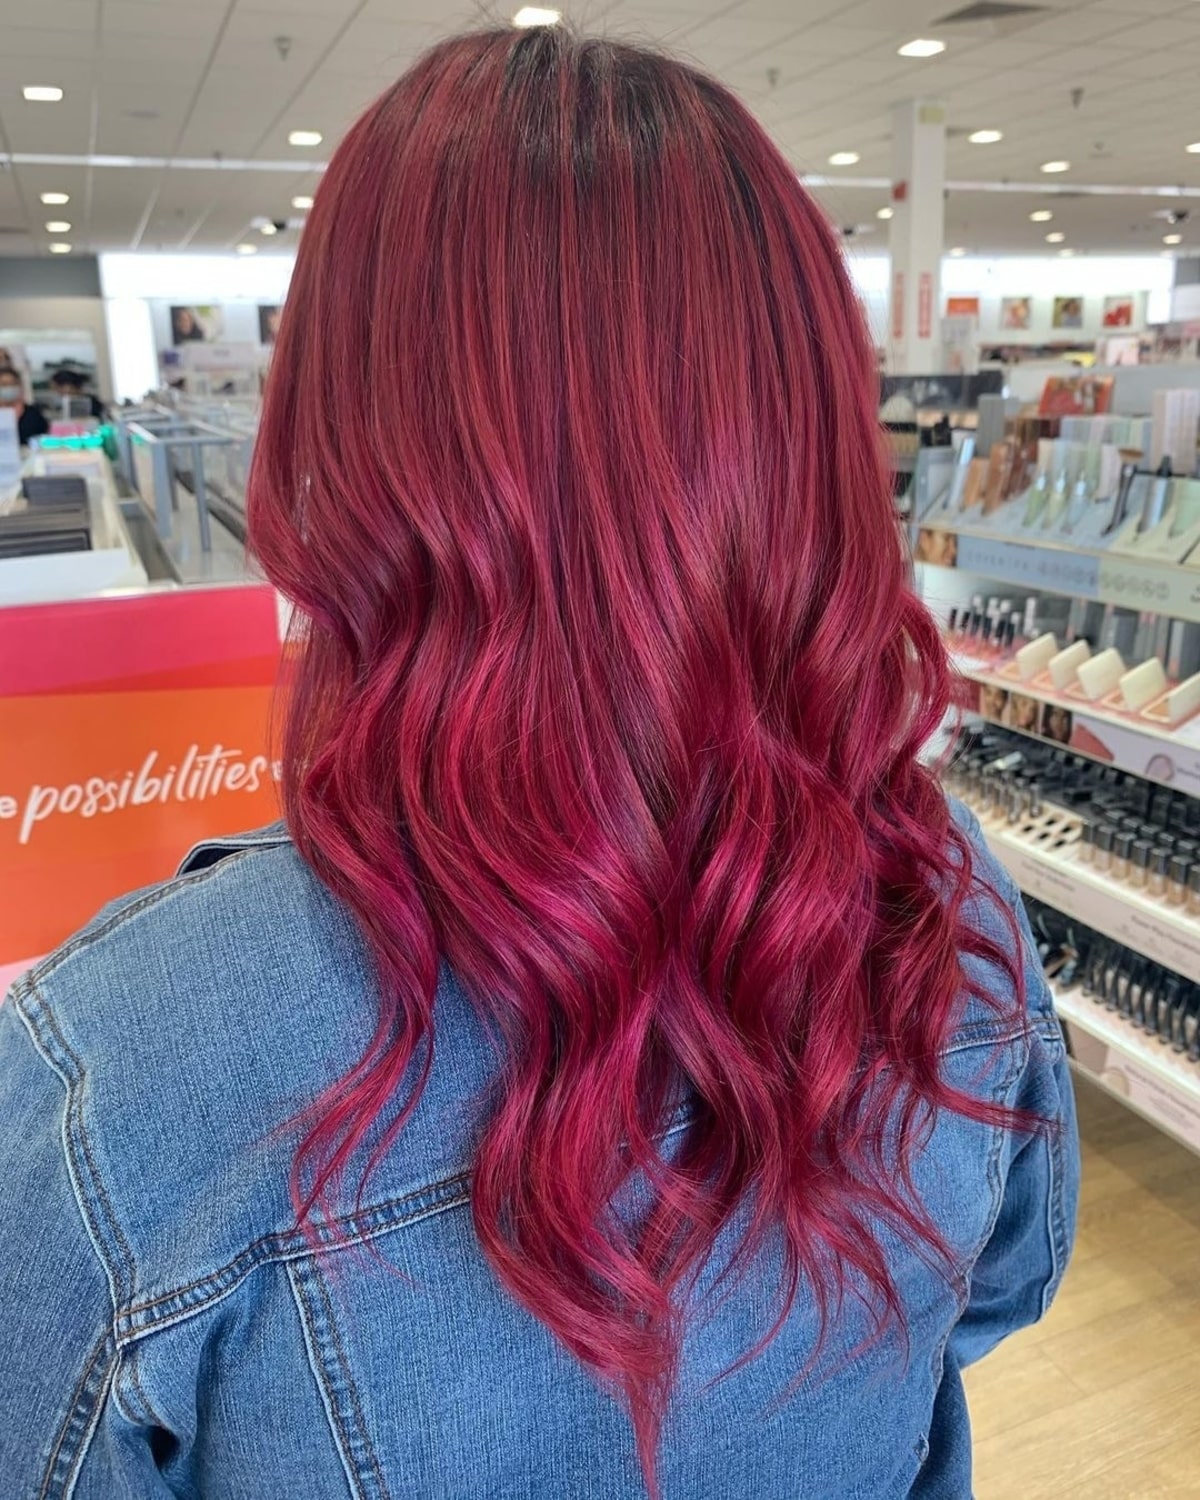 31 Best Maroon Hair Color Ideas of 2021 Are Here